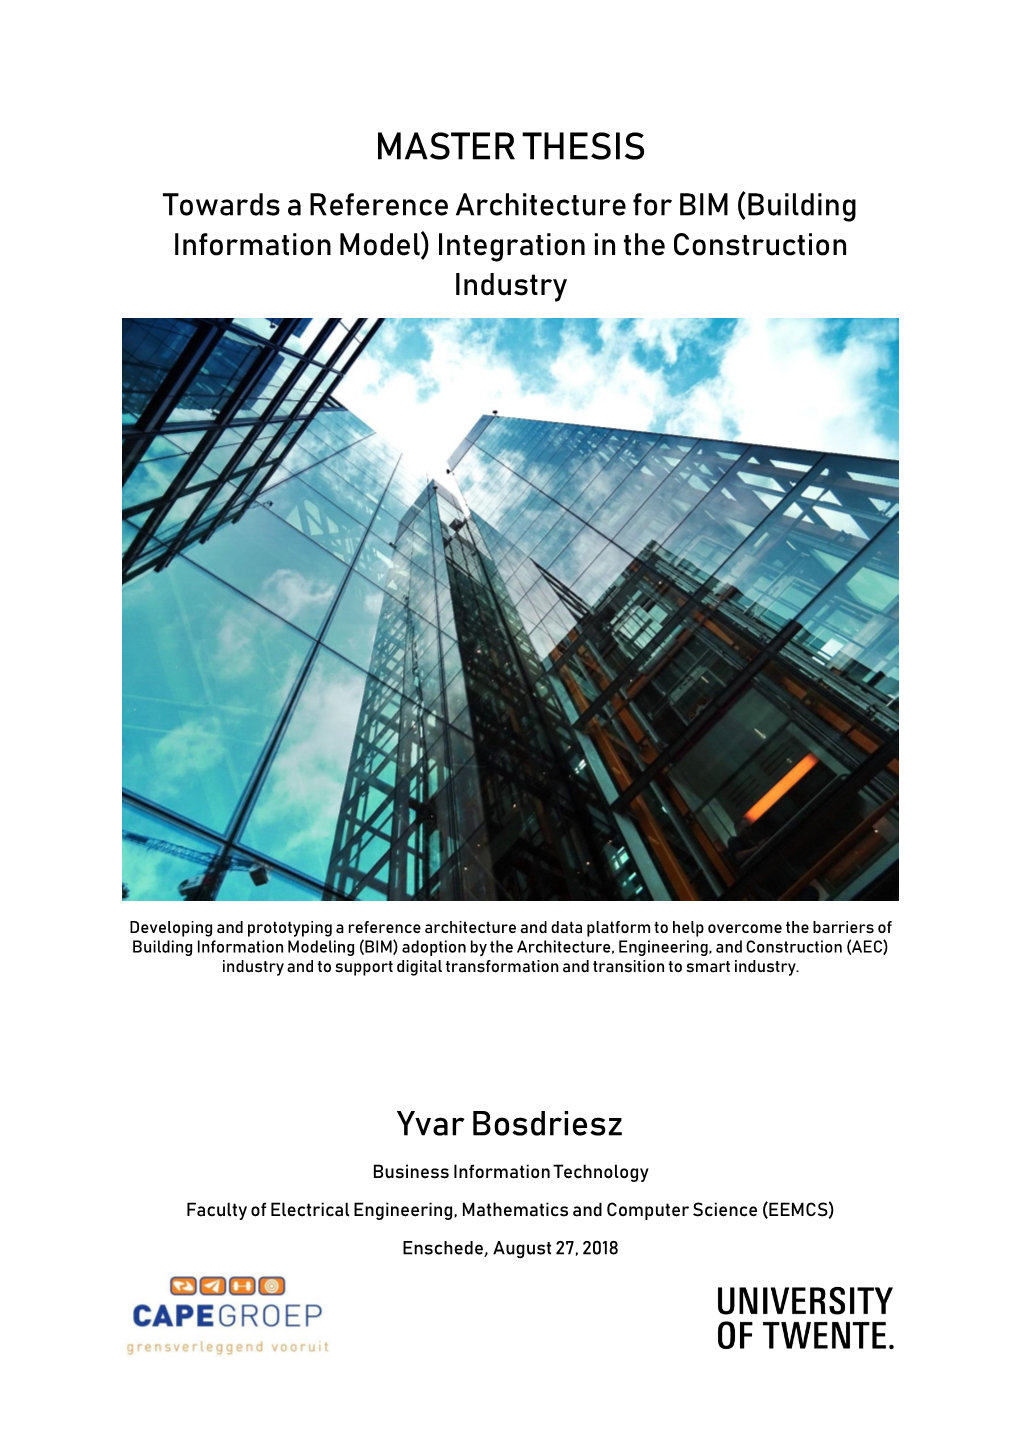 MASTER THESIS Towards a Reference Architecture for BIM (Building Information Model) Integration in the Construction Industry